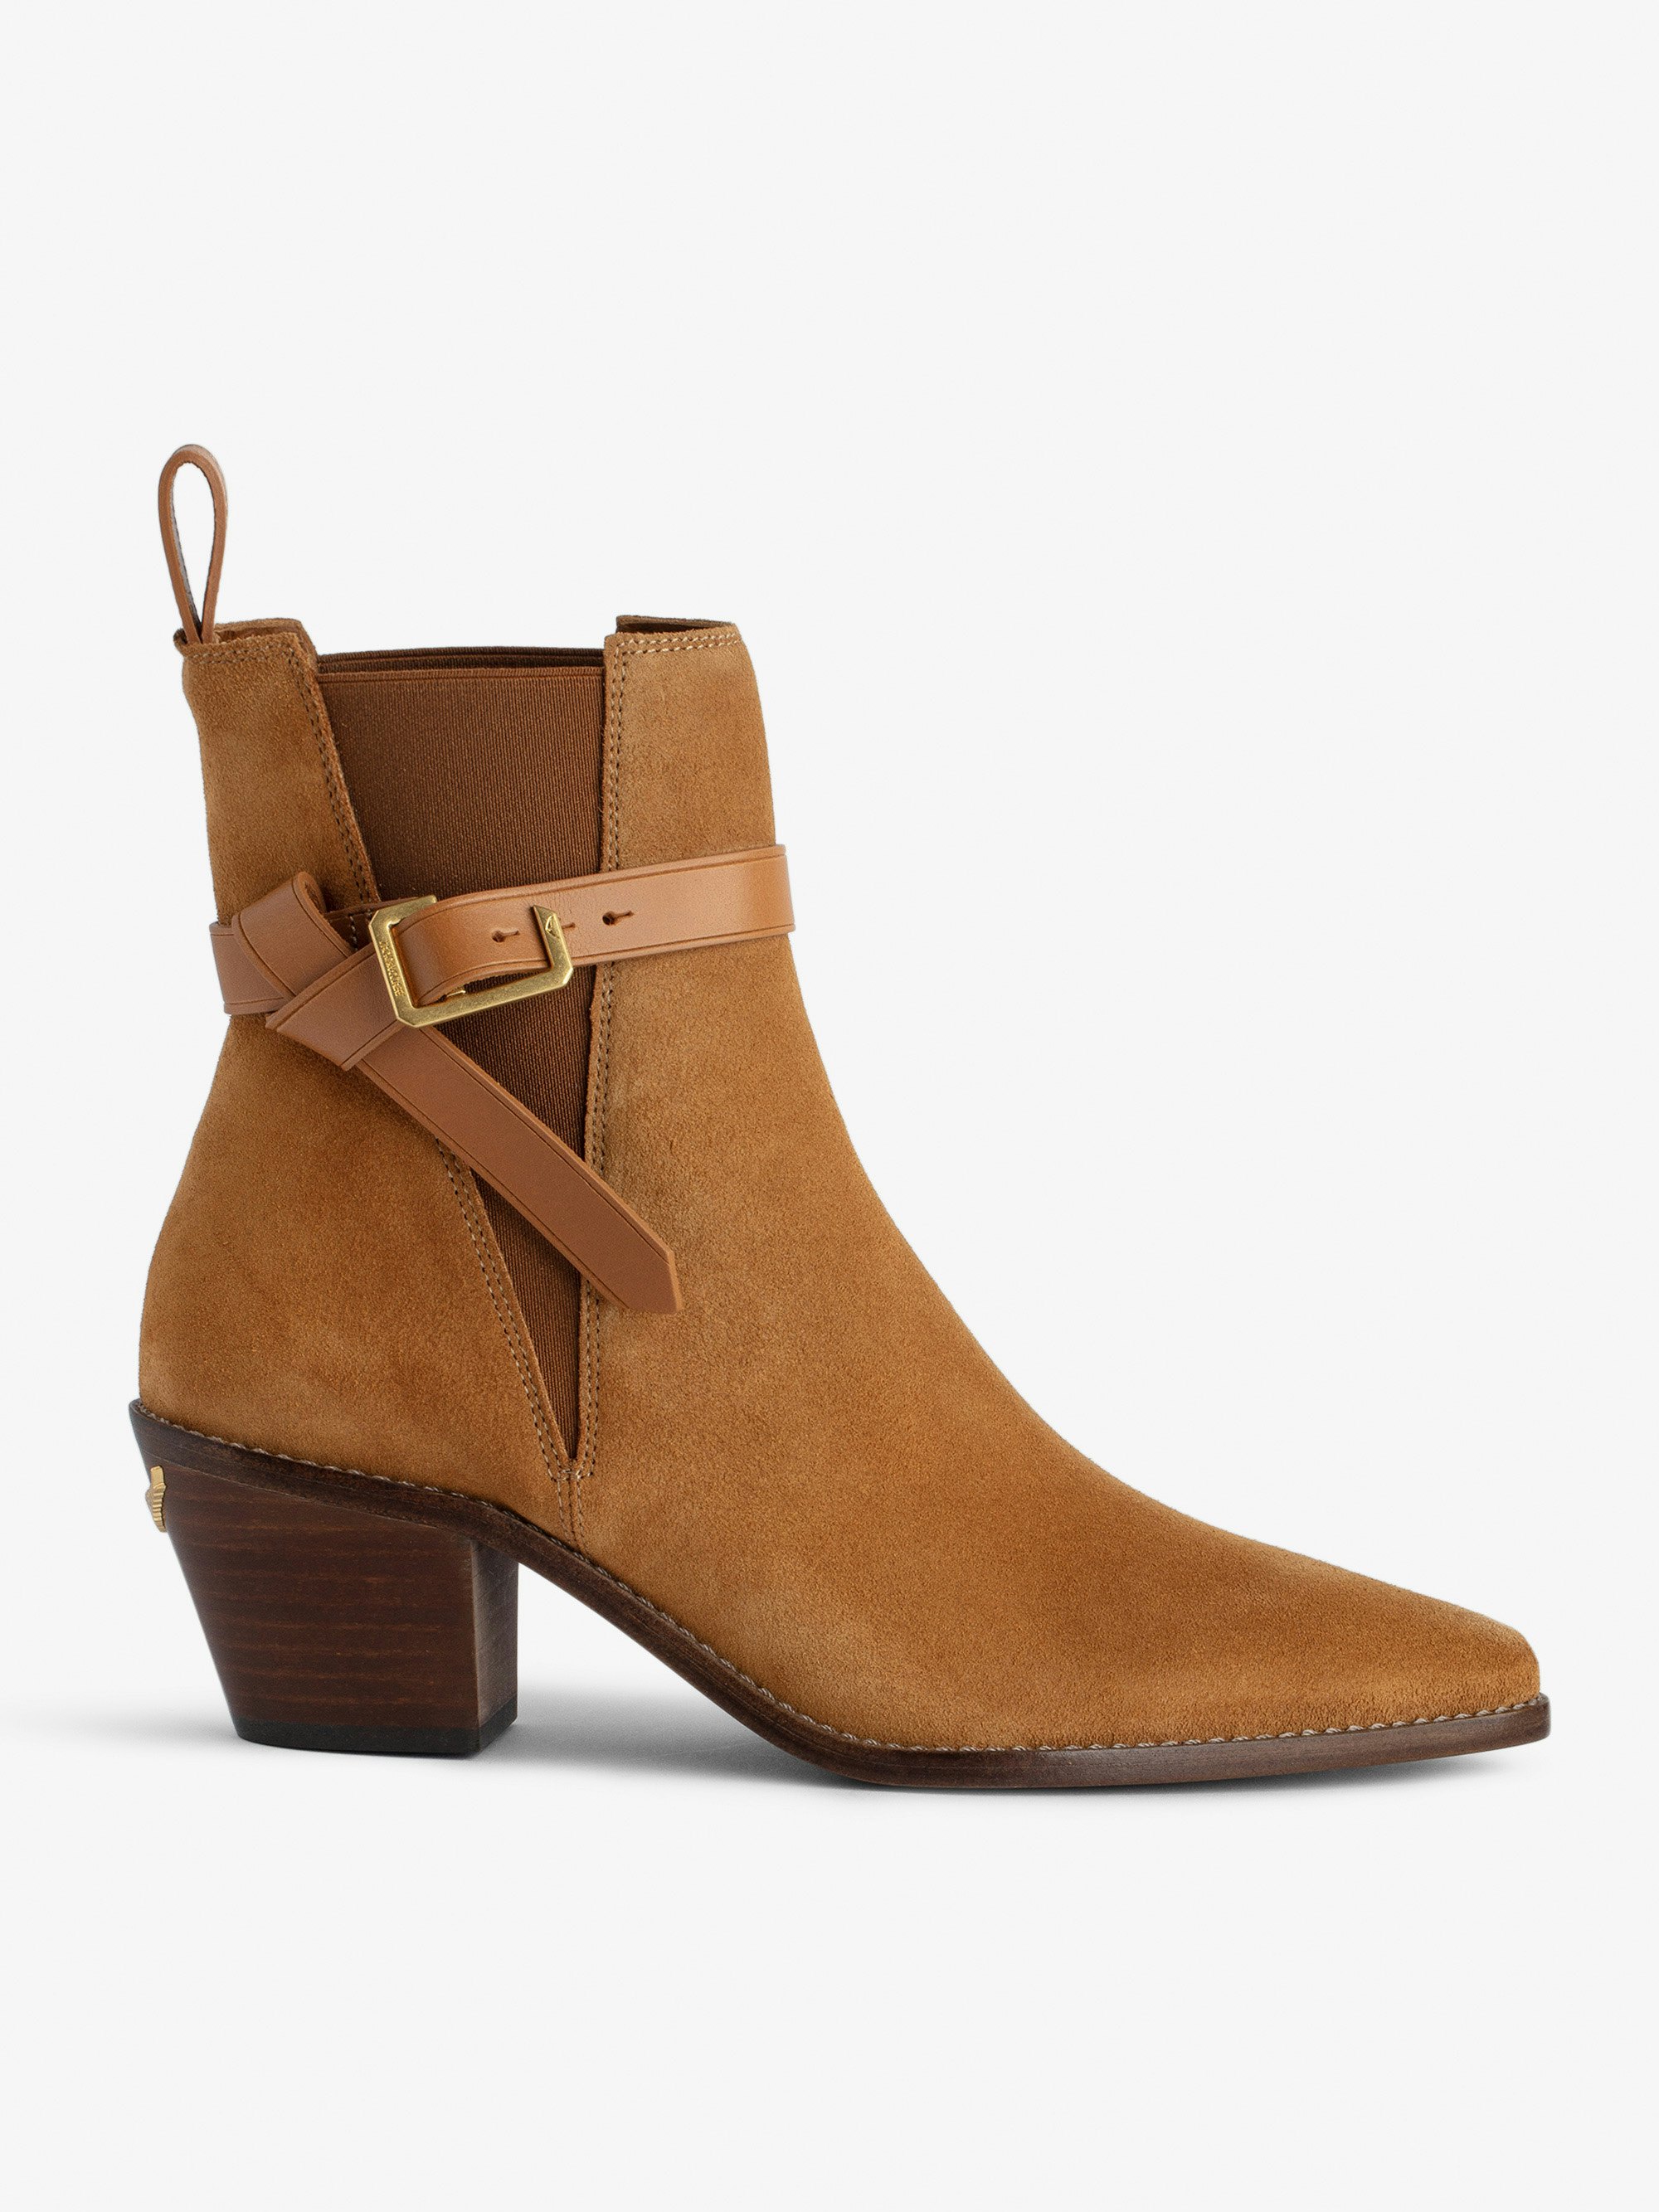 Tyler Suede Ankle Boots - Brown suede leather ankle boots with C buckle.